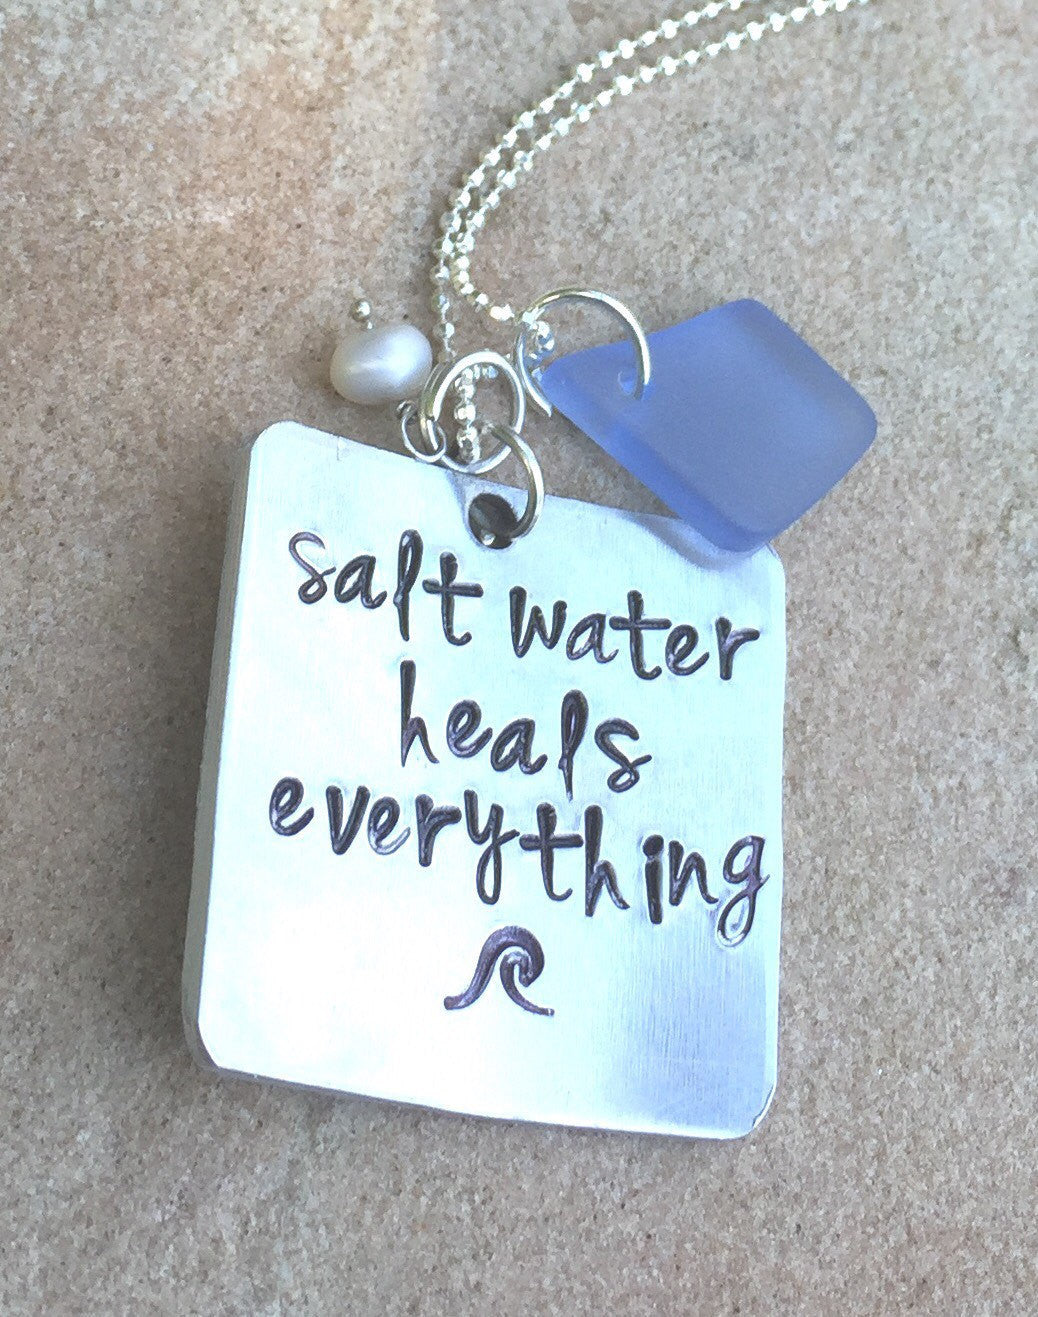 Salt Water Heals Everything Necklace, Beach Necklace, Beach Jewelry, Mothers Day Necklace, inspirational necklace, natashaaloha - Natashaaloha, jewelry, bracelets, necklace, keychains, fishing lures, gifts for men, charms, personalized, 